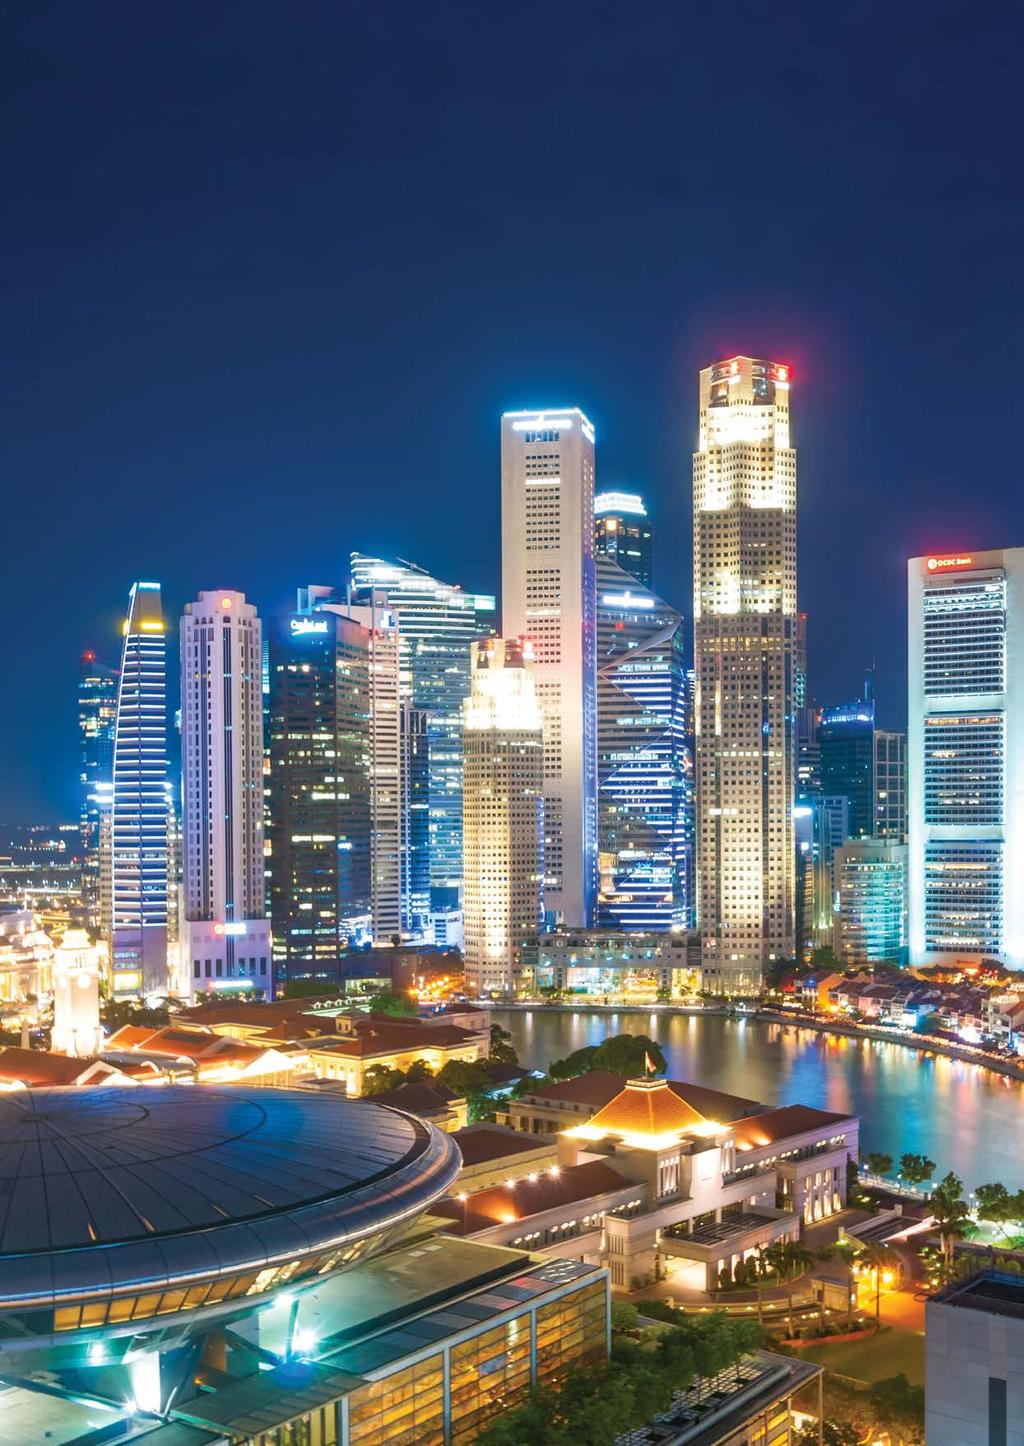 SINGAPORE A global financial centre, a commerce and aviation hub, and a distinctive, vibrant city.